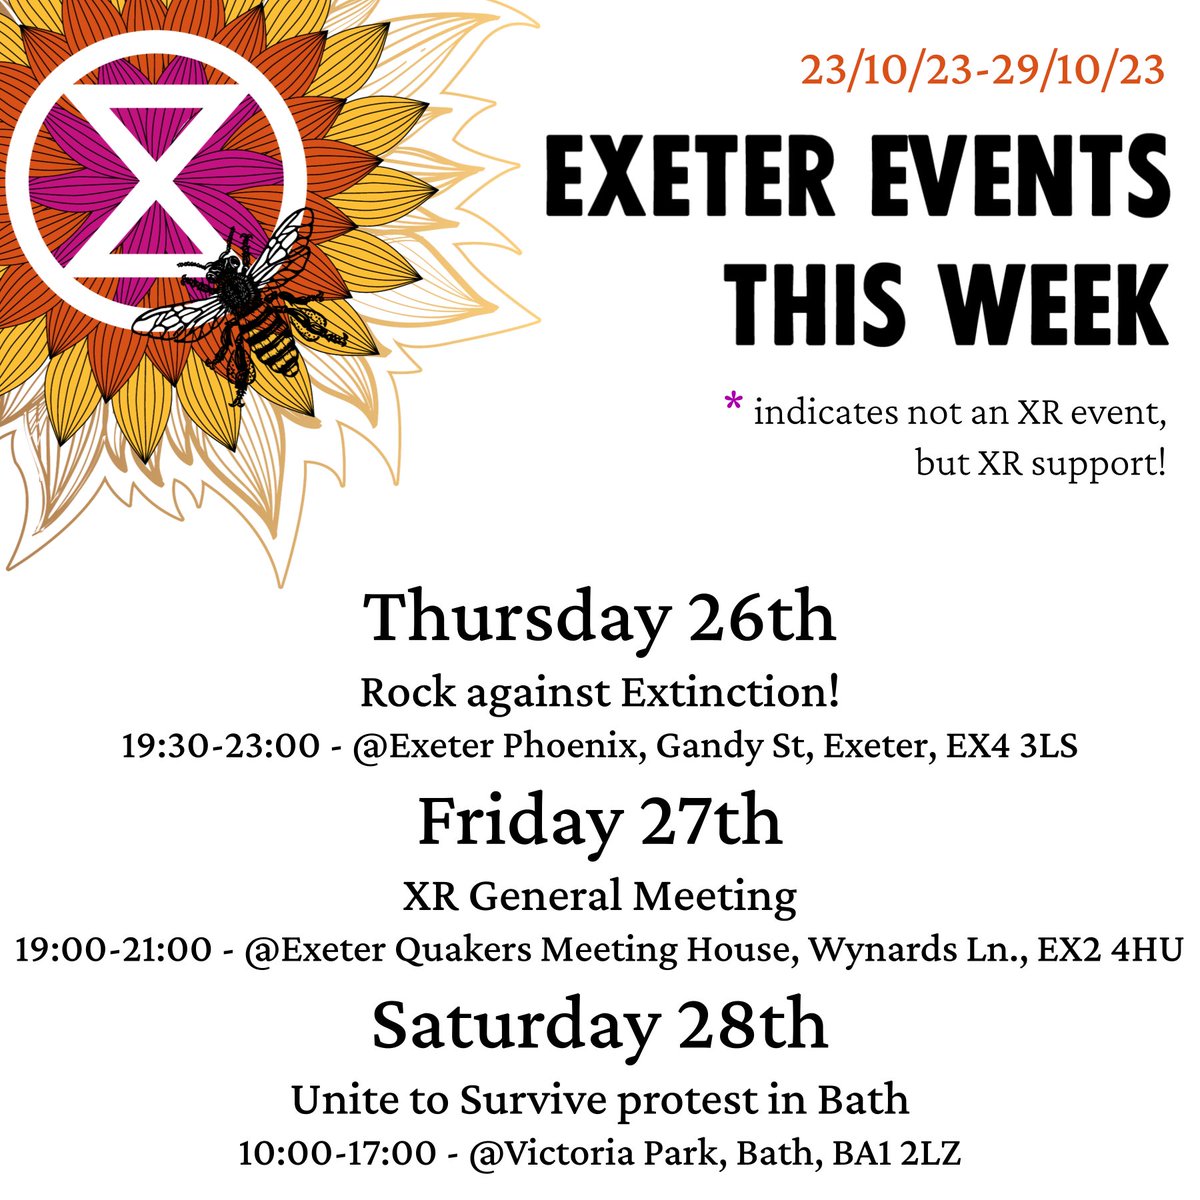 Morning all 👋hope you’re well! Here are this weeks events :) we have our rock against #extinction fundraiser at the Phoenix this Thursday 🎸and we will be uniting to survive in Bath this Saturday with people from across the SW for social, climate and nature justice 💚🤝#ActNow